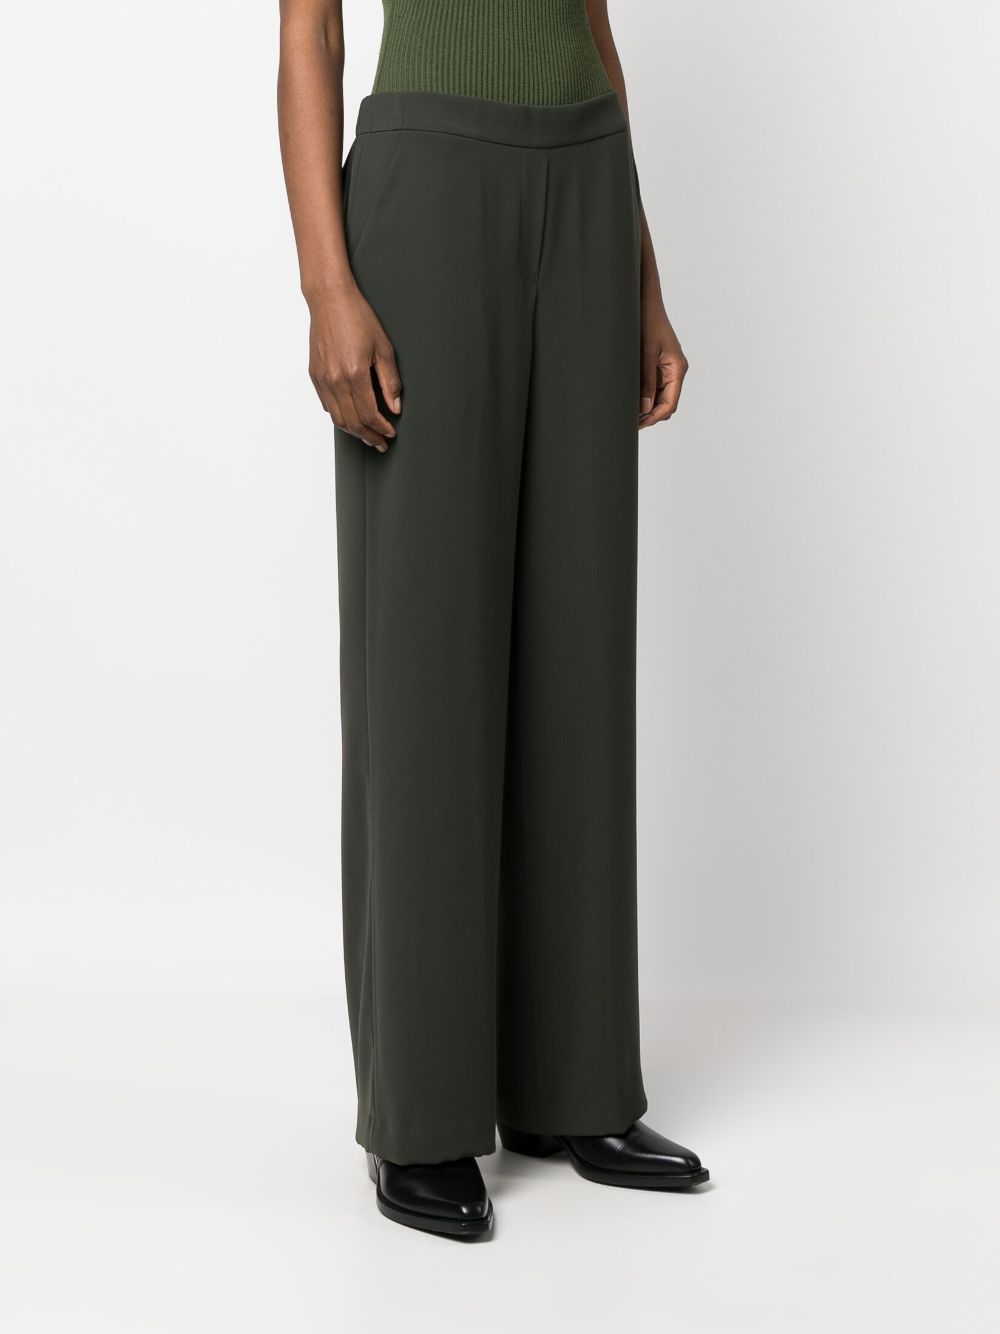 Green low-rise straight-leg trousers